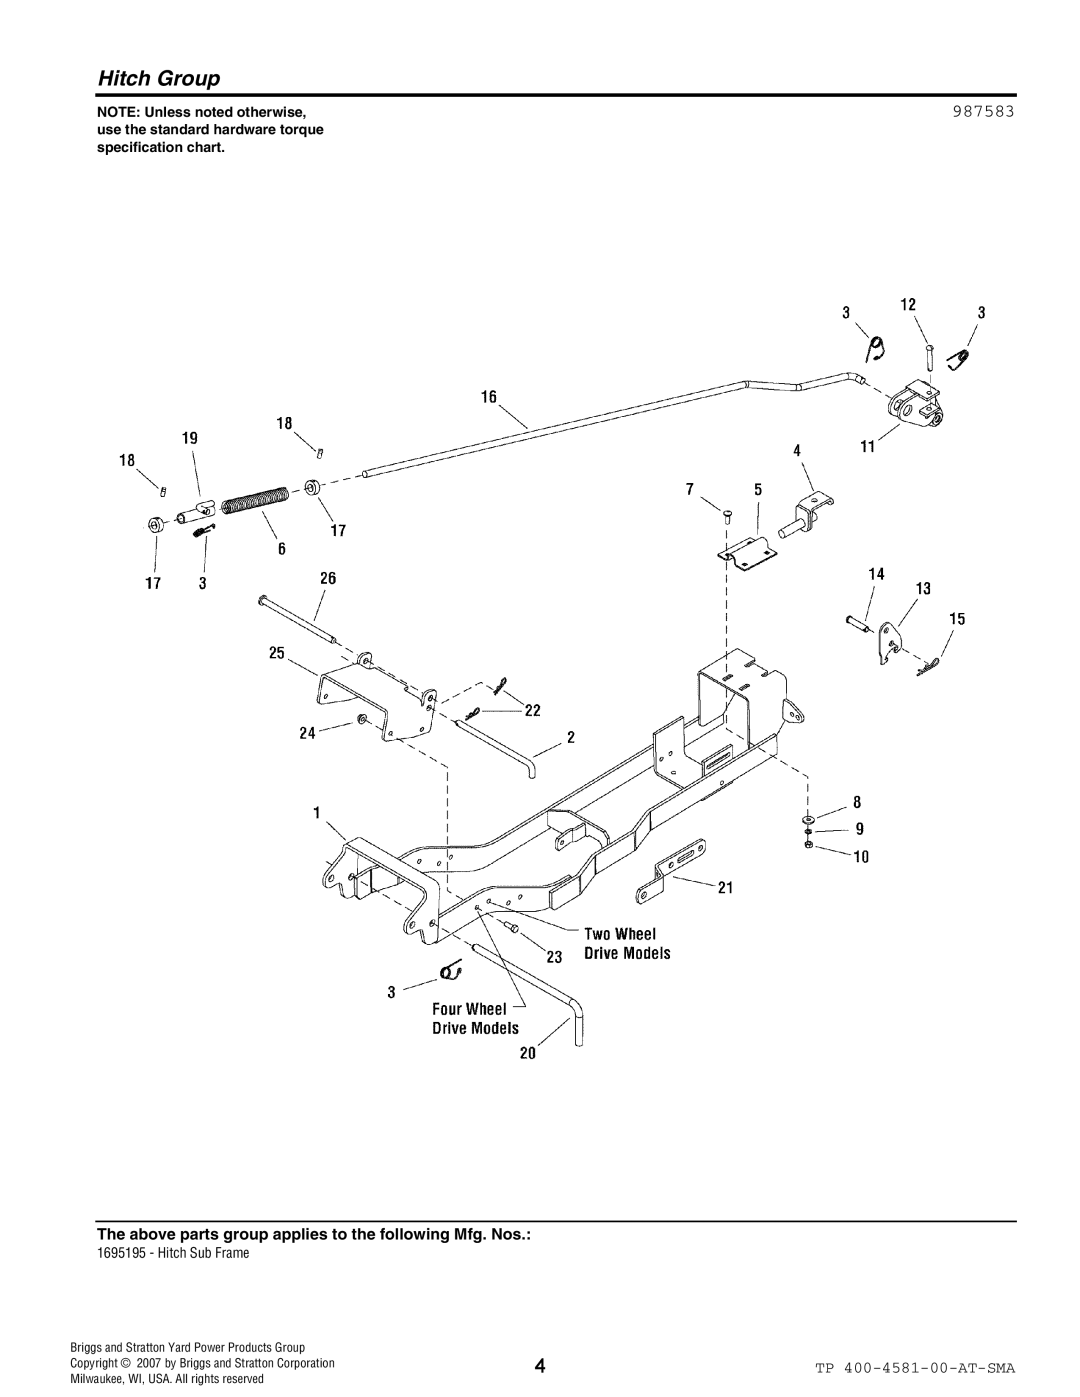 Simplicity 1695195 manual Hitch Group, 987583, NOTE Unless noted otherwise, Briggs and Stratton Yard Power Products Group 